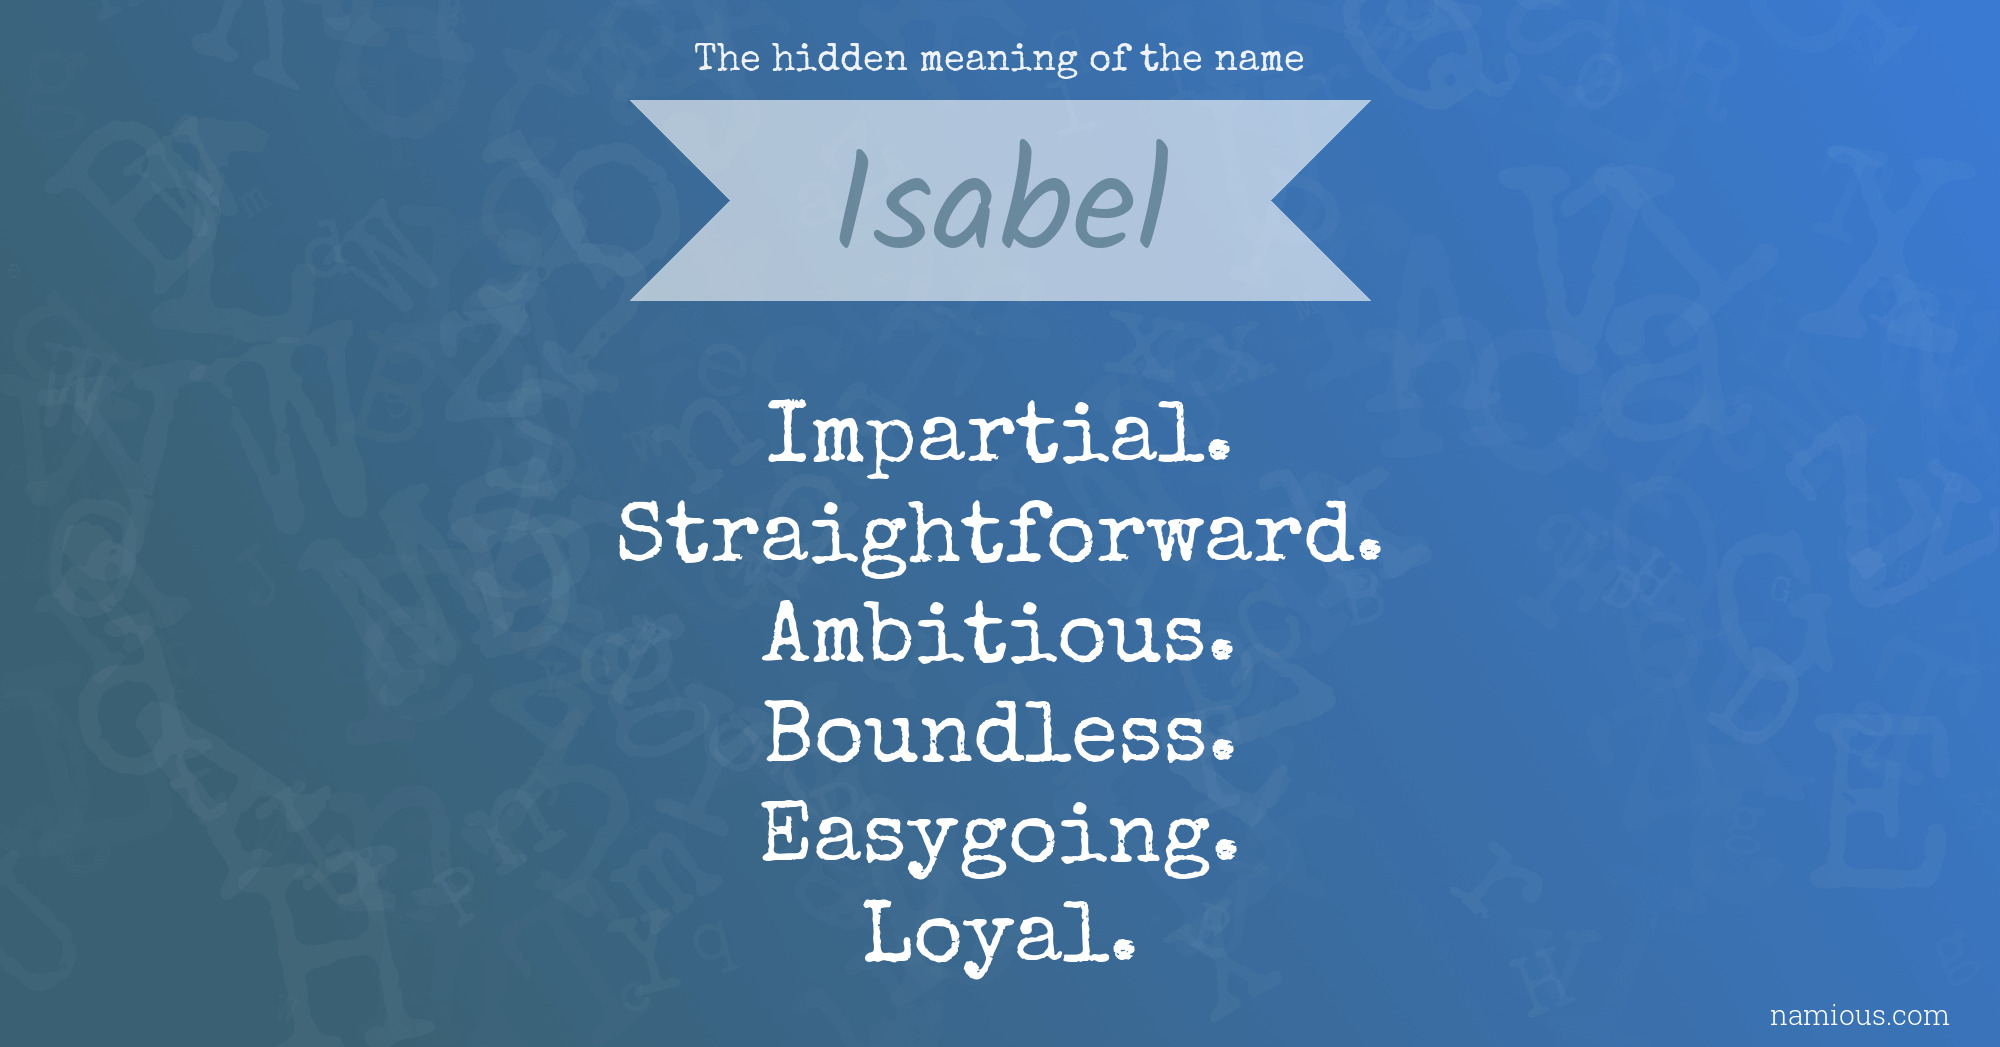 The hidden meaning of the name Isabel